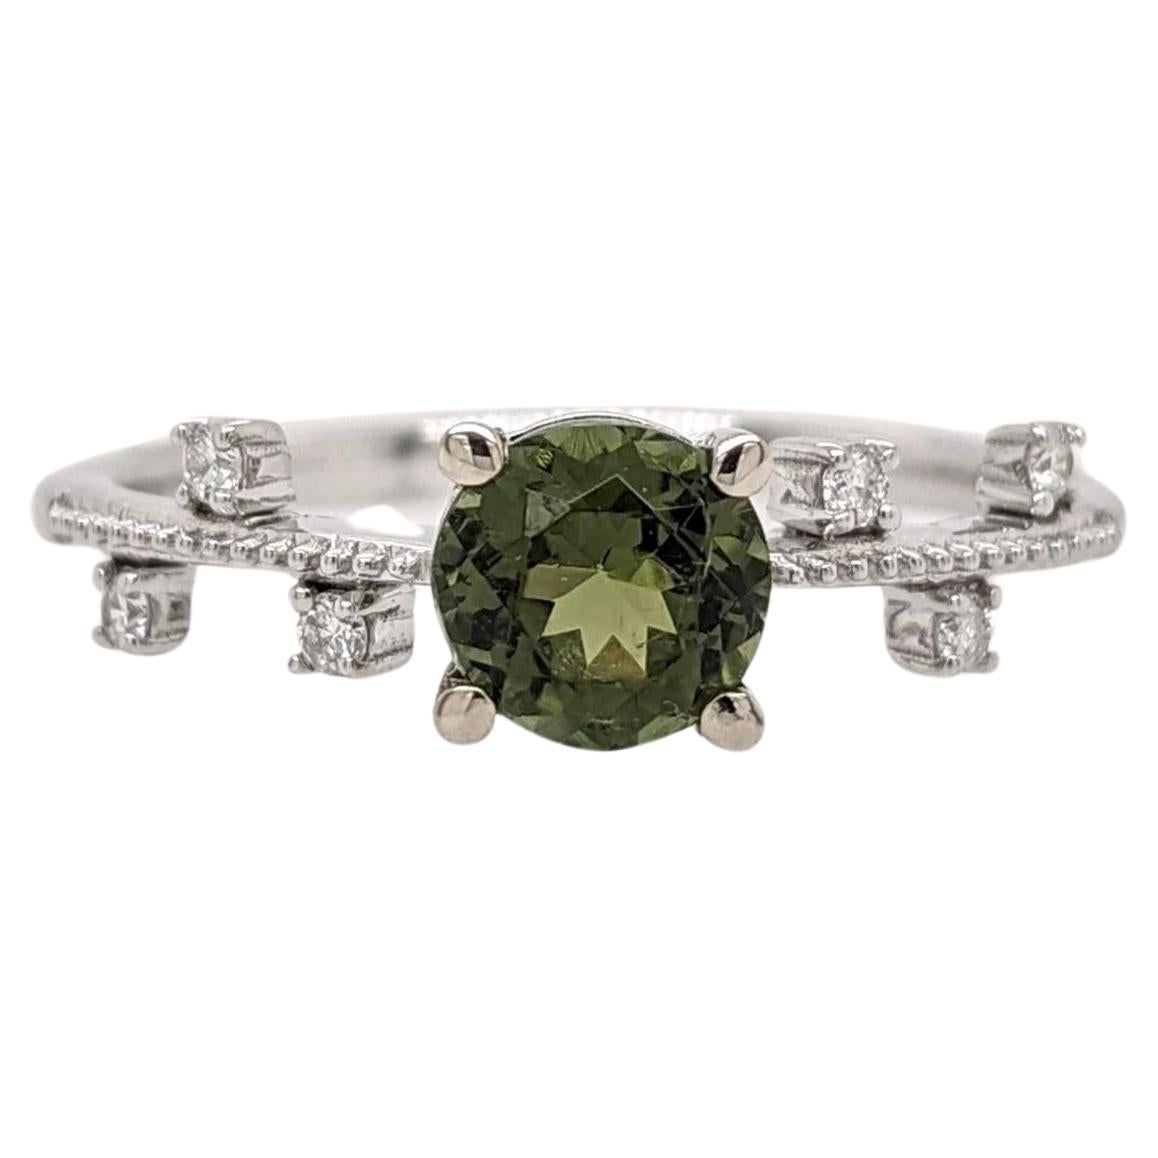 Green Tourmaline Ring w Earth Mined Diamonds in Solid 14K White Gold Round 5.5mm